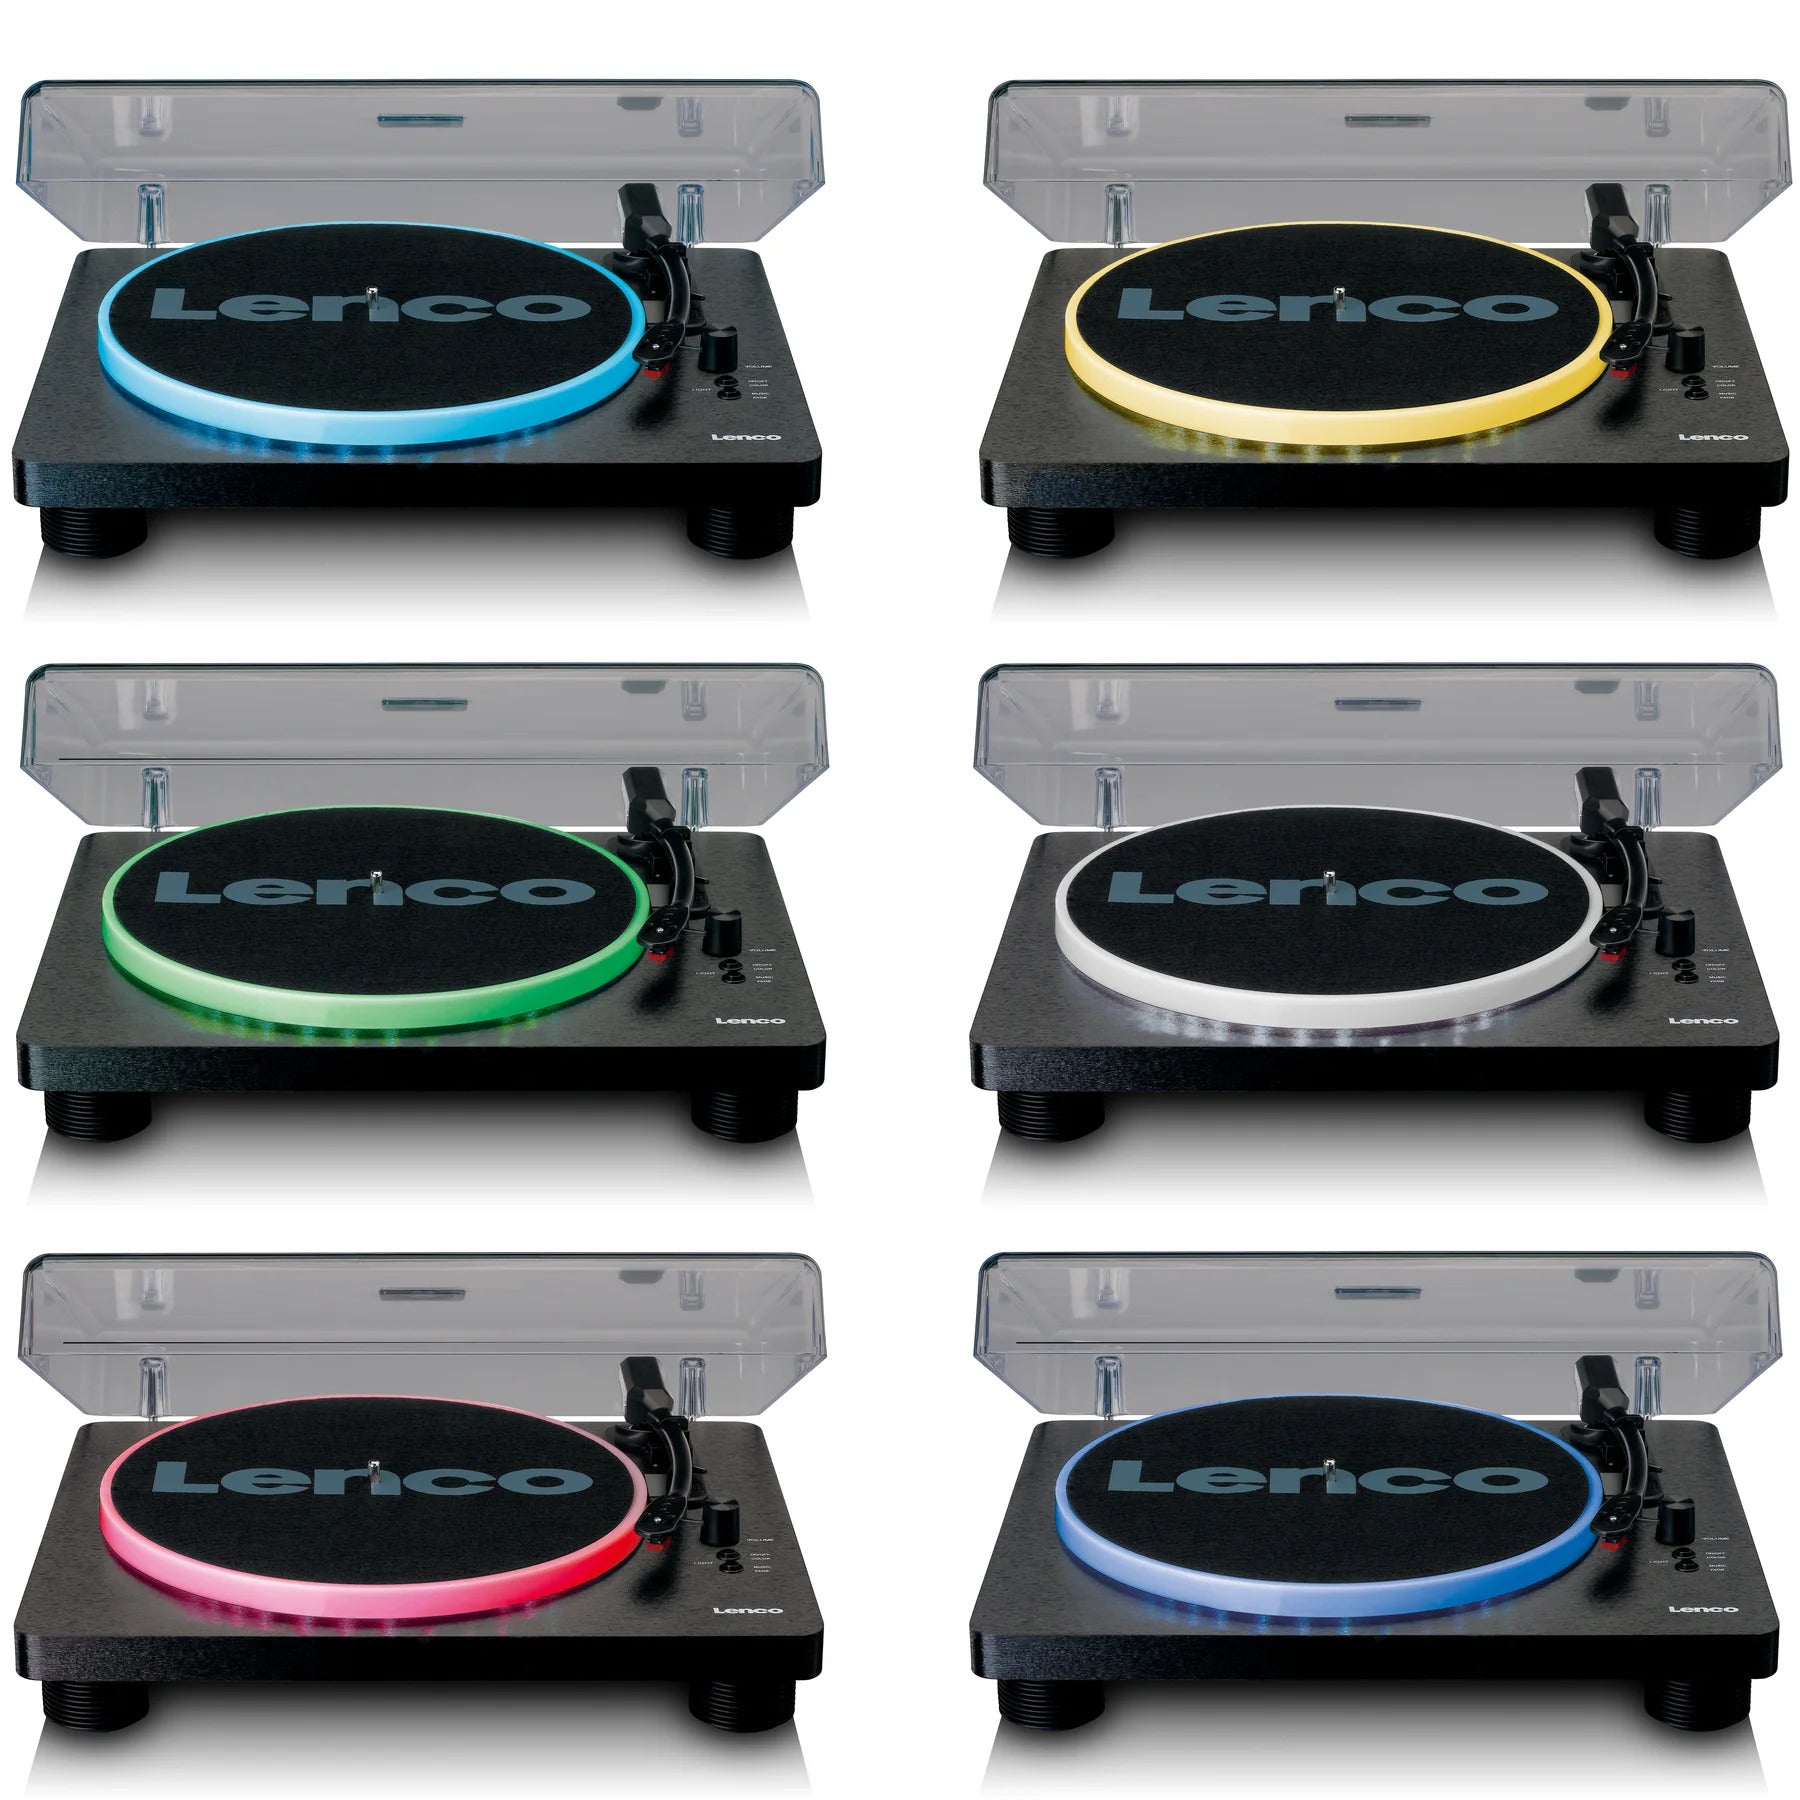 Lenco LS-50LED Turntable with PC Encoding, Speakers and Lights